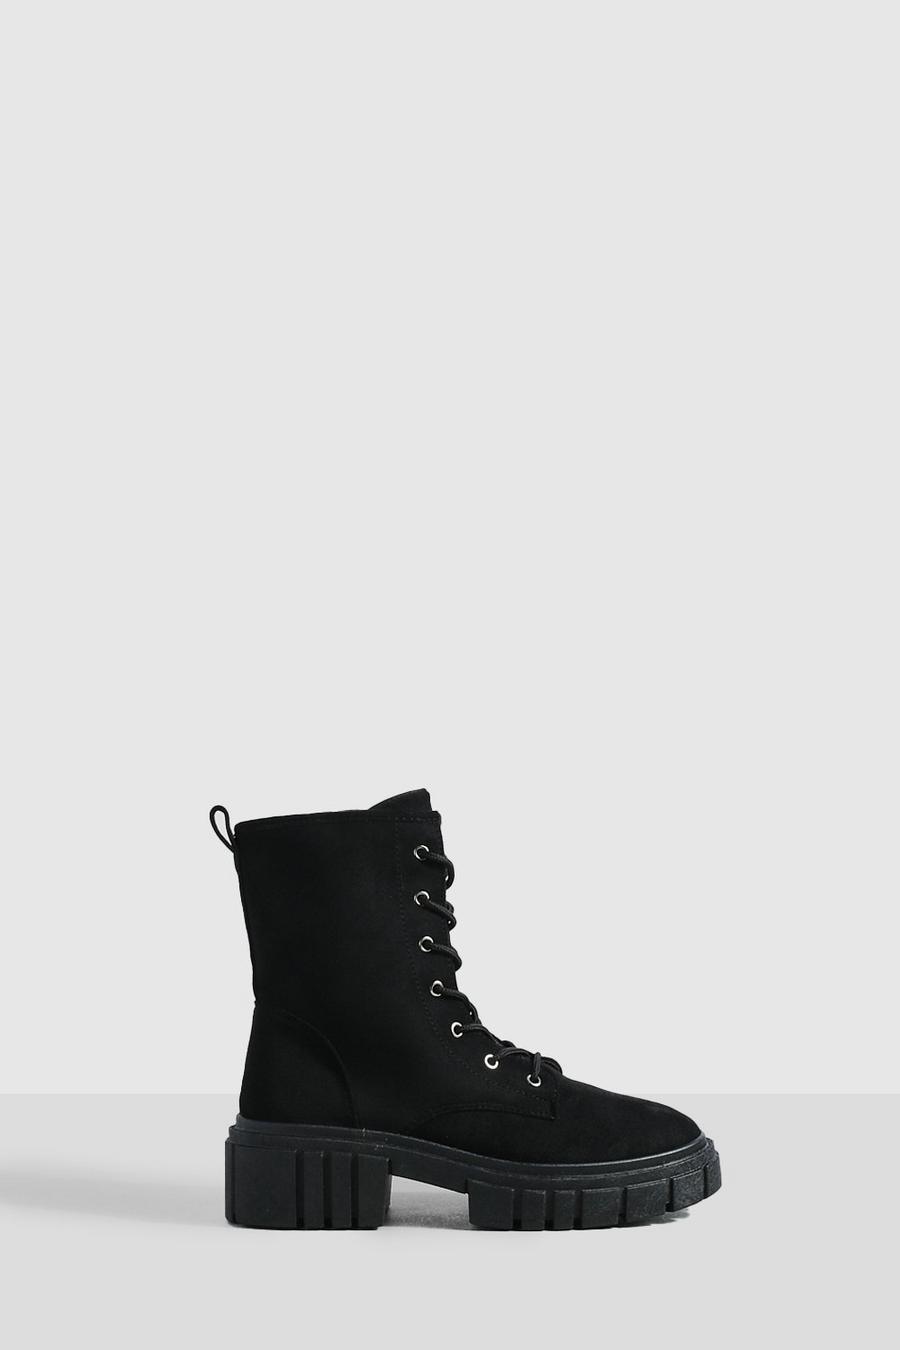 Black svart Cleated Sole Lace Up Hiker Boots